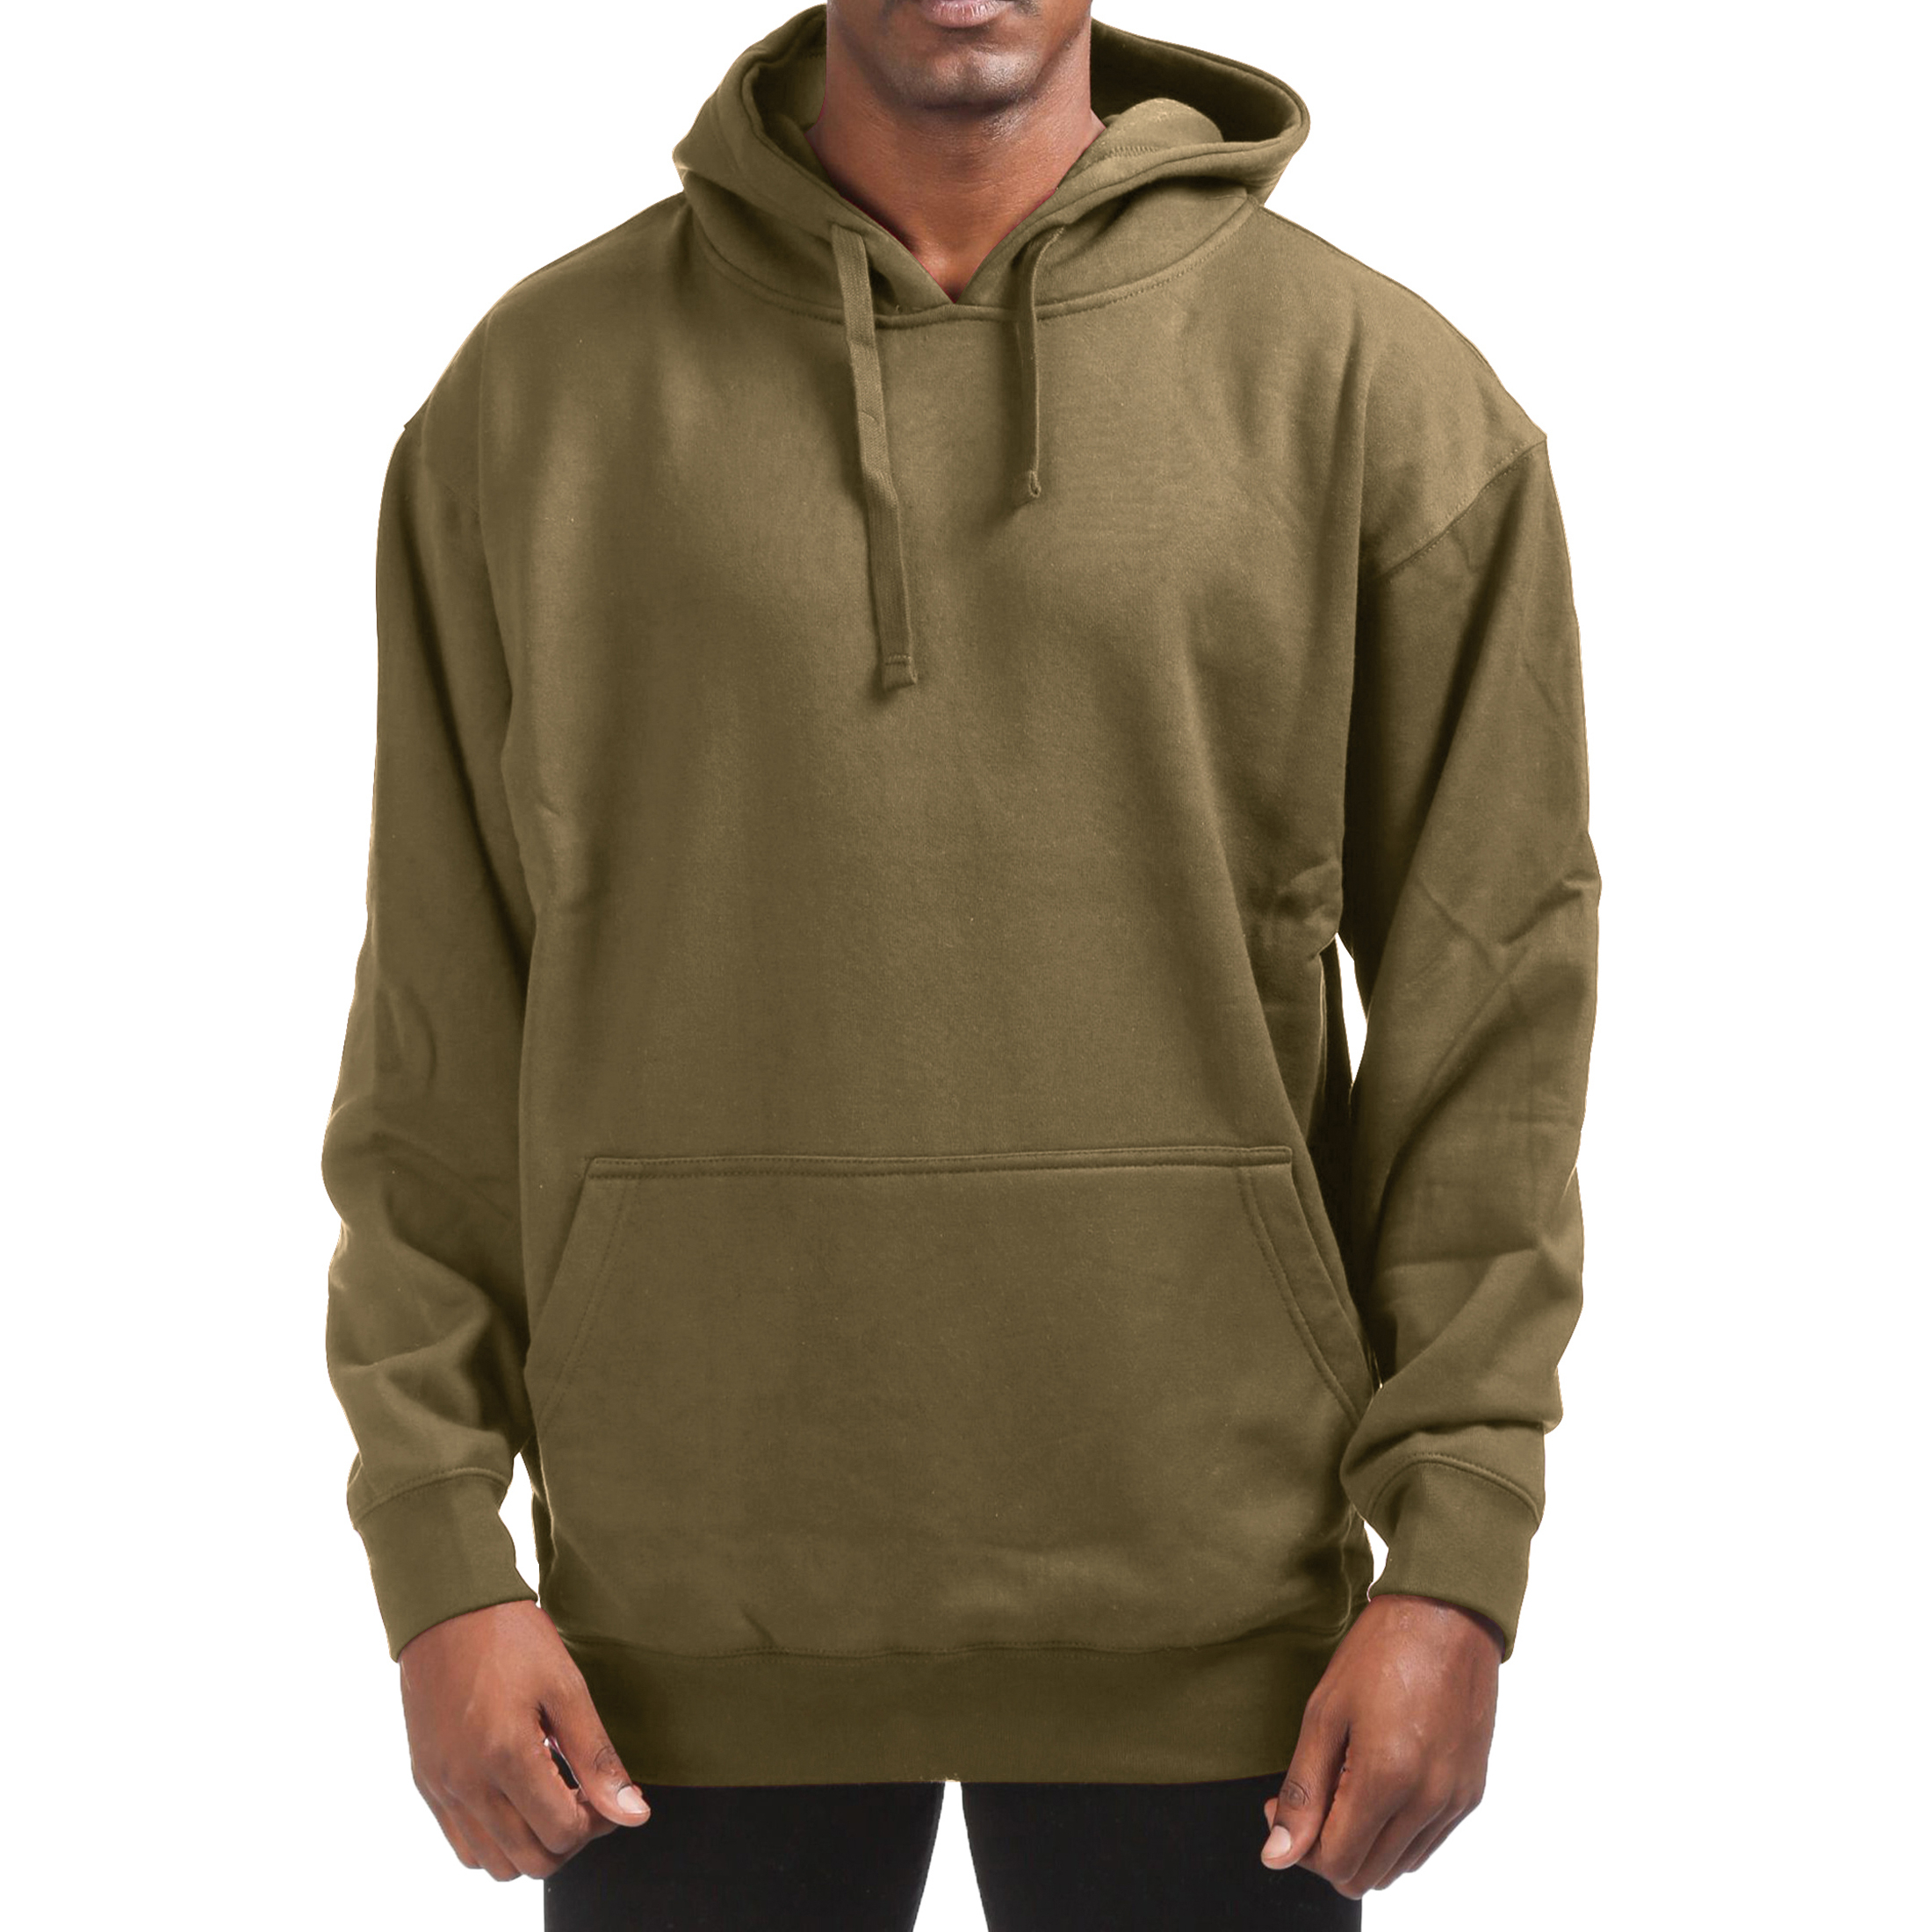 Men's Cotton-Blend Fleece Pullover Hoodie With Pocket (Big & Tall Sizes Available) - Olive, X-Large